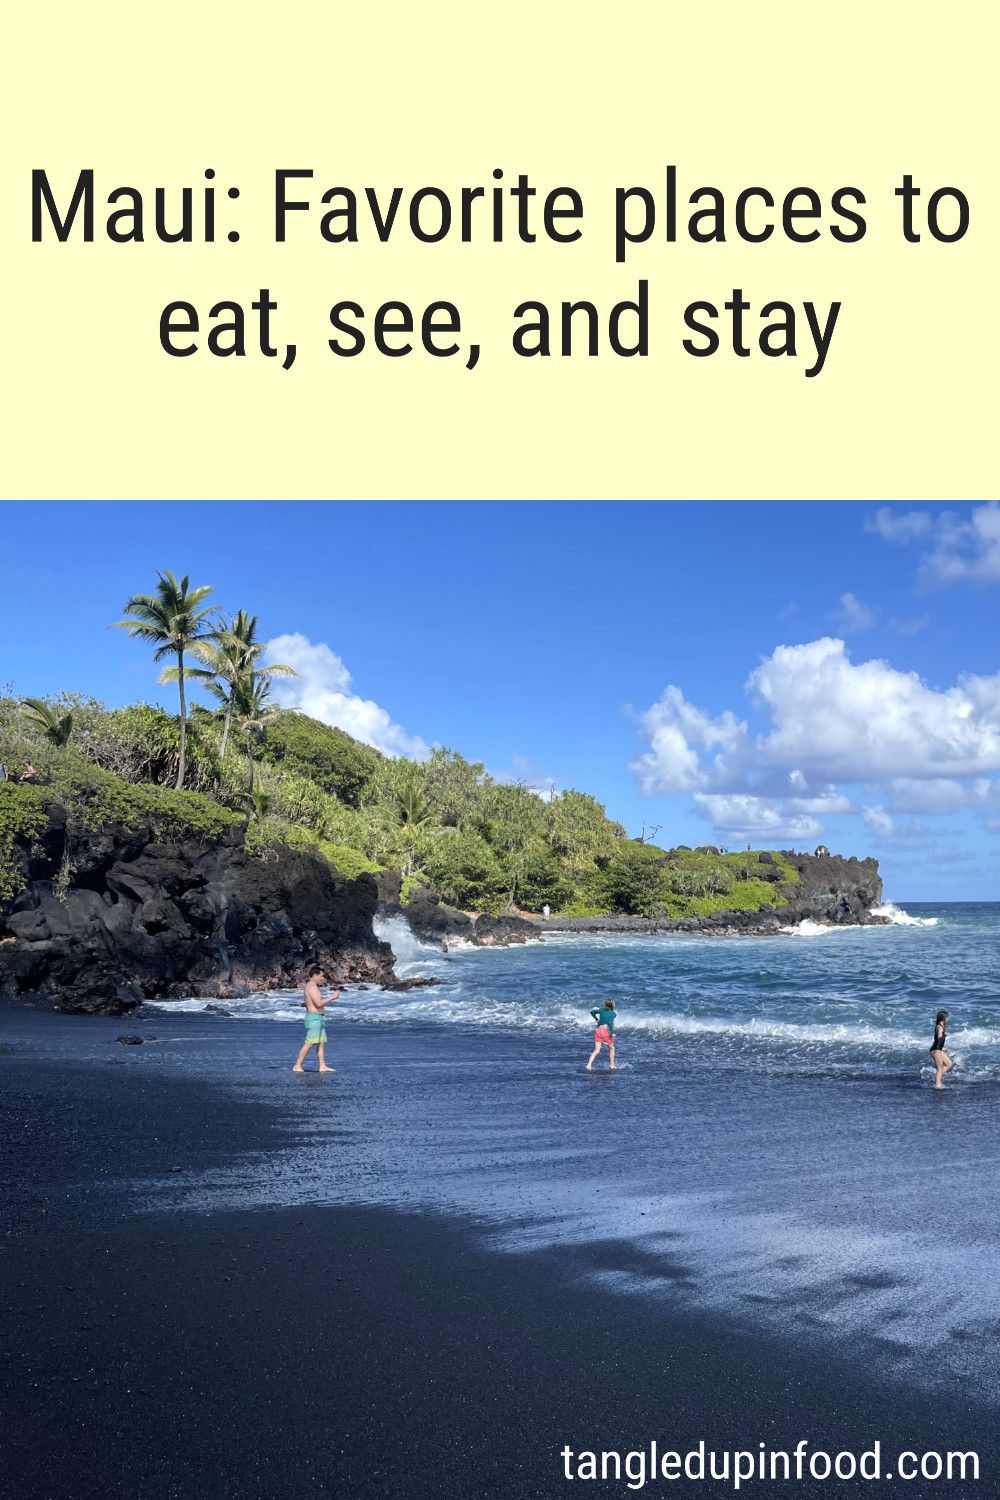 Photo of black sand beach with text reading "Maui: Favorite places to eat, see, and stay"